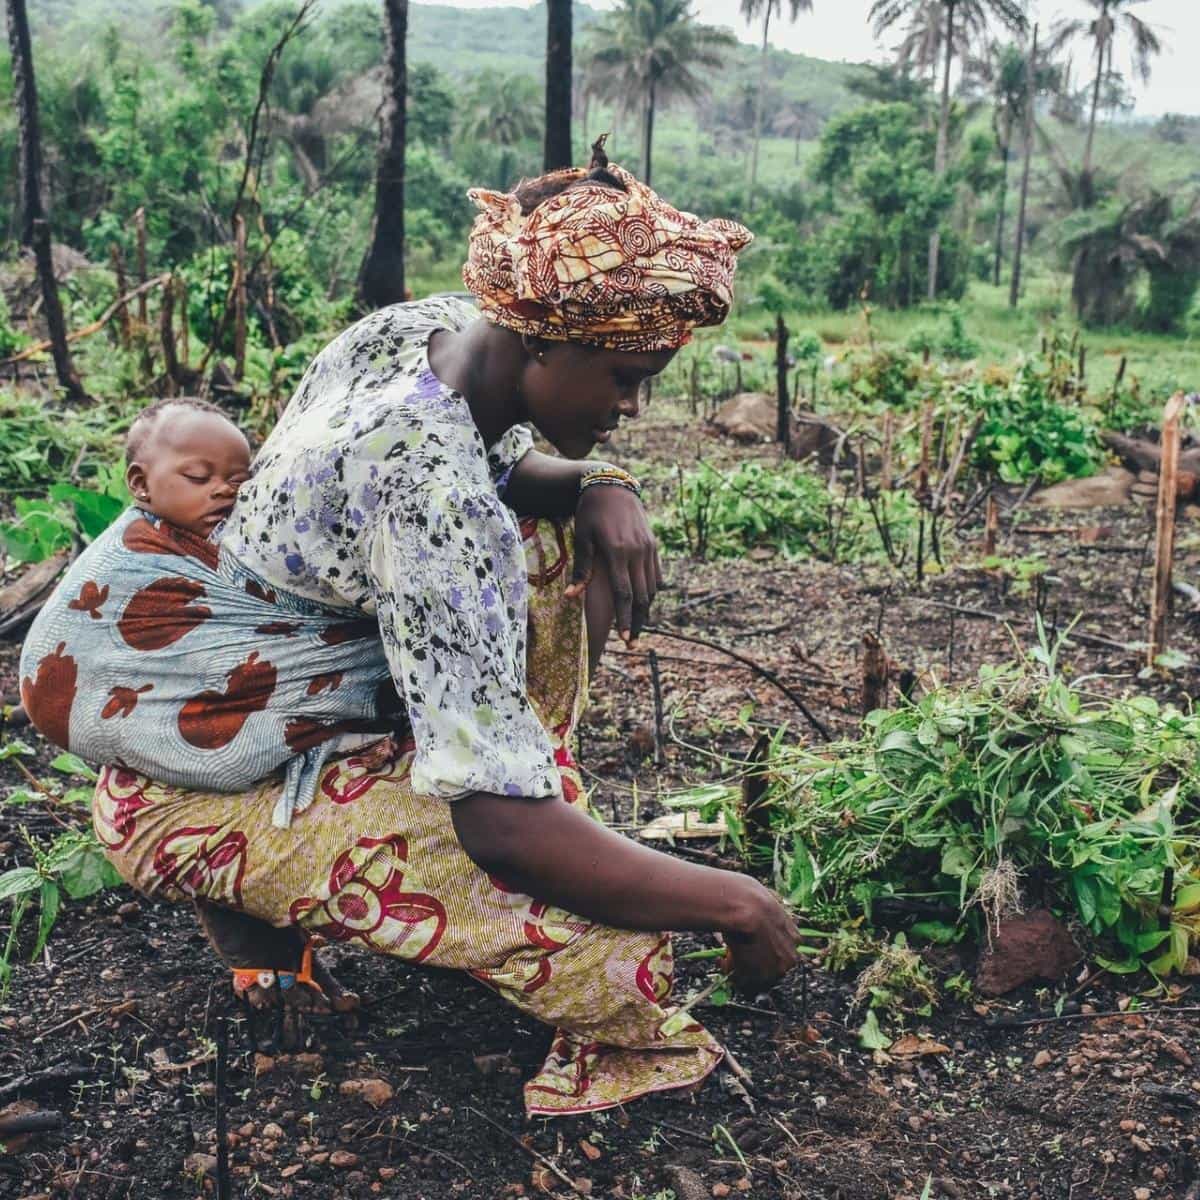 A dark-skinned young woman in a long-sleeved shirt and long skirt iscrouches to tend to crops with a sleeping dark-skinned baby in a fabric baby sling on her back.